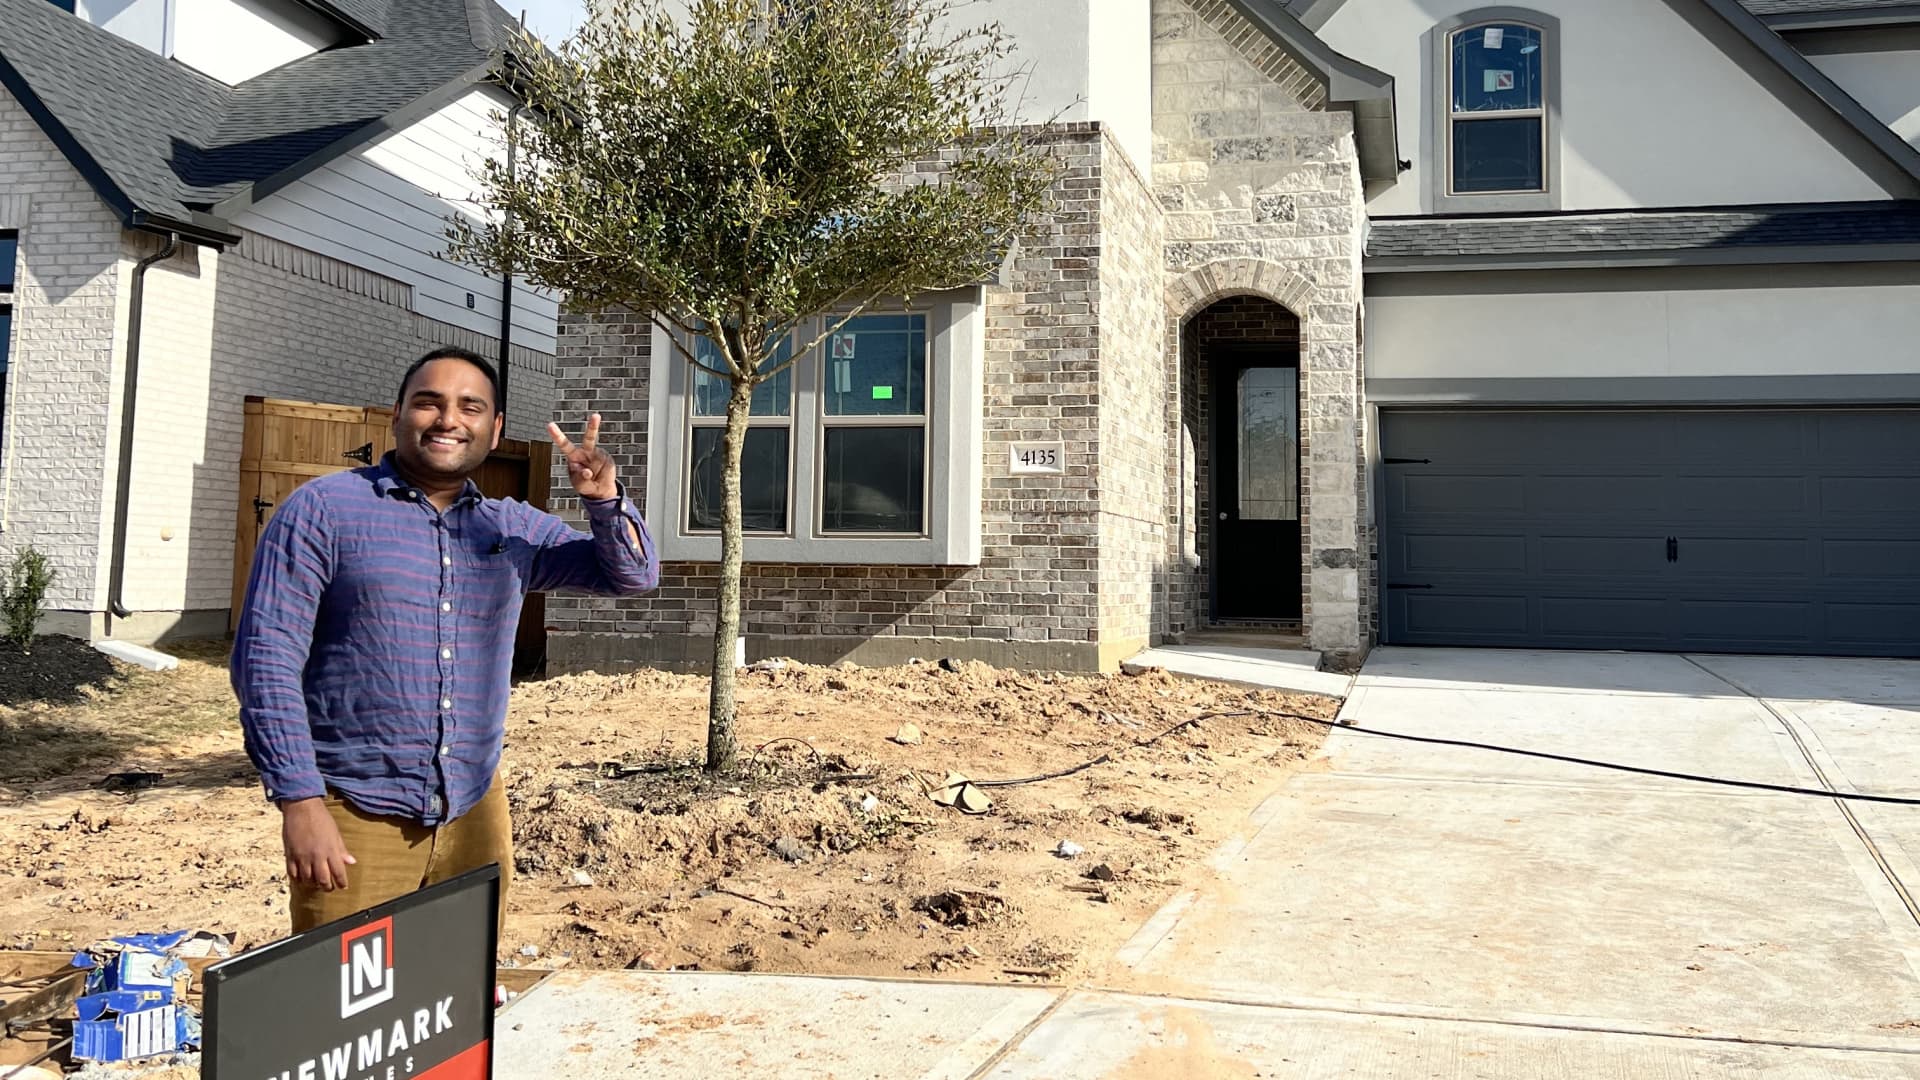 Sal Khan learned about real estate investing from an older brother and bought his first property in April 2022. He now has four properties in his portfolio.